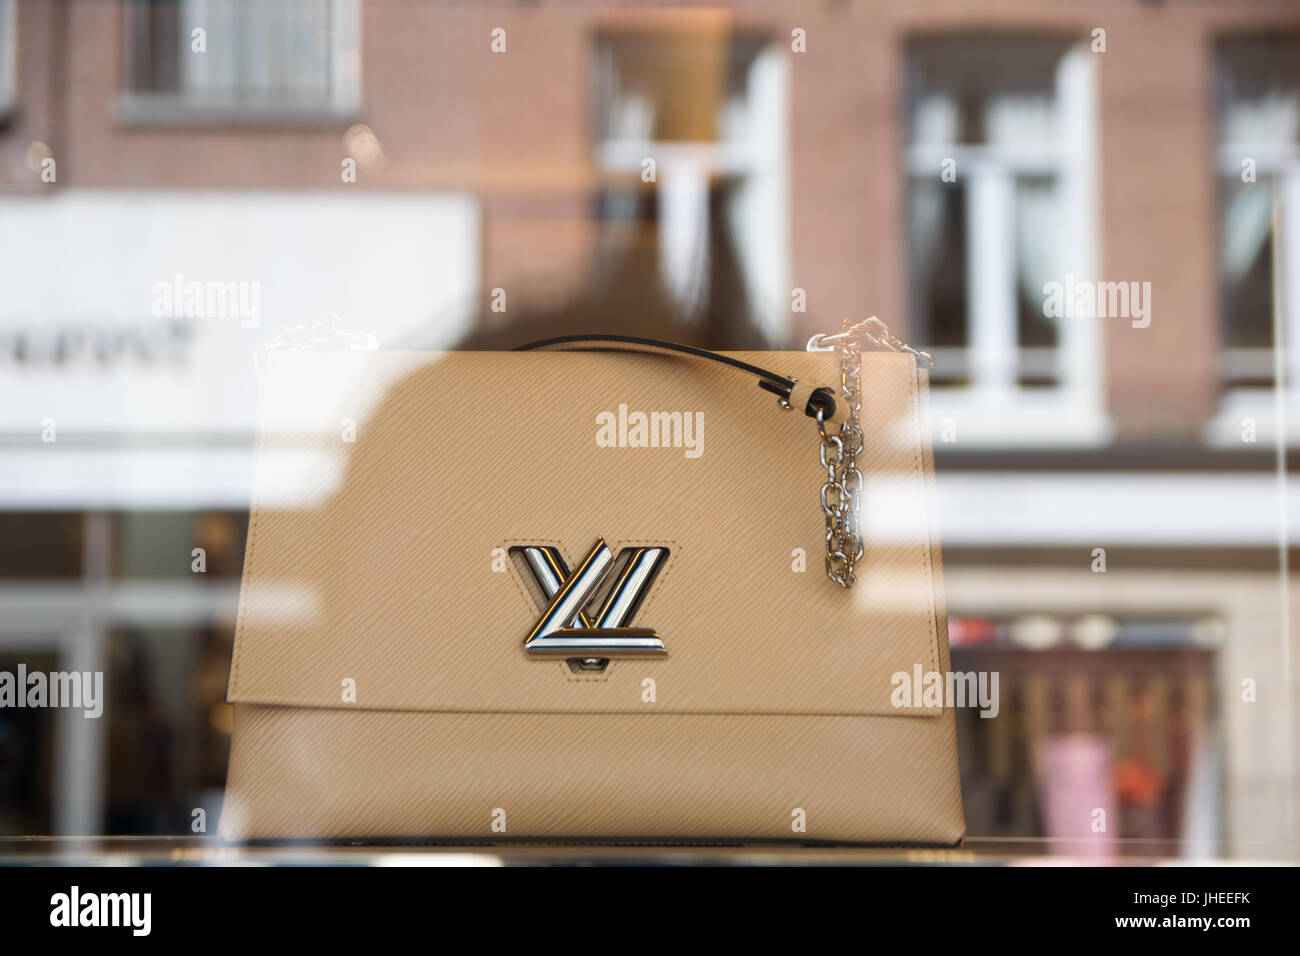 NETHERLANDS, AMSTERDAM - JUNE 03, 2017: View of a Louis Vuitton leather handbag as part of Masters Collection in collaboration with Jeff Koons on disp Stock Photo